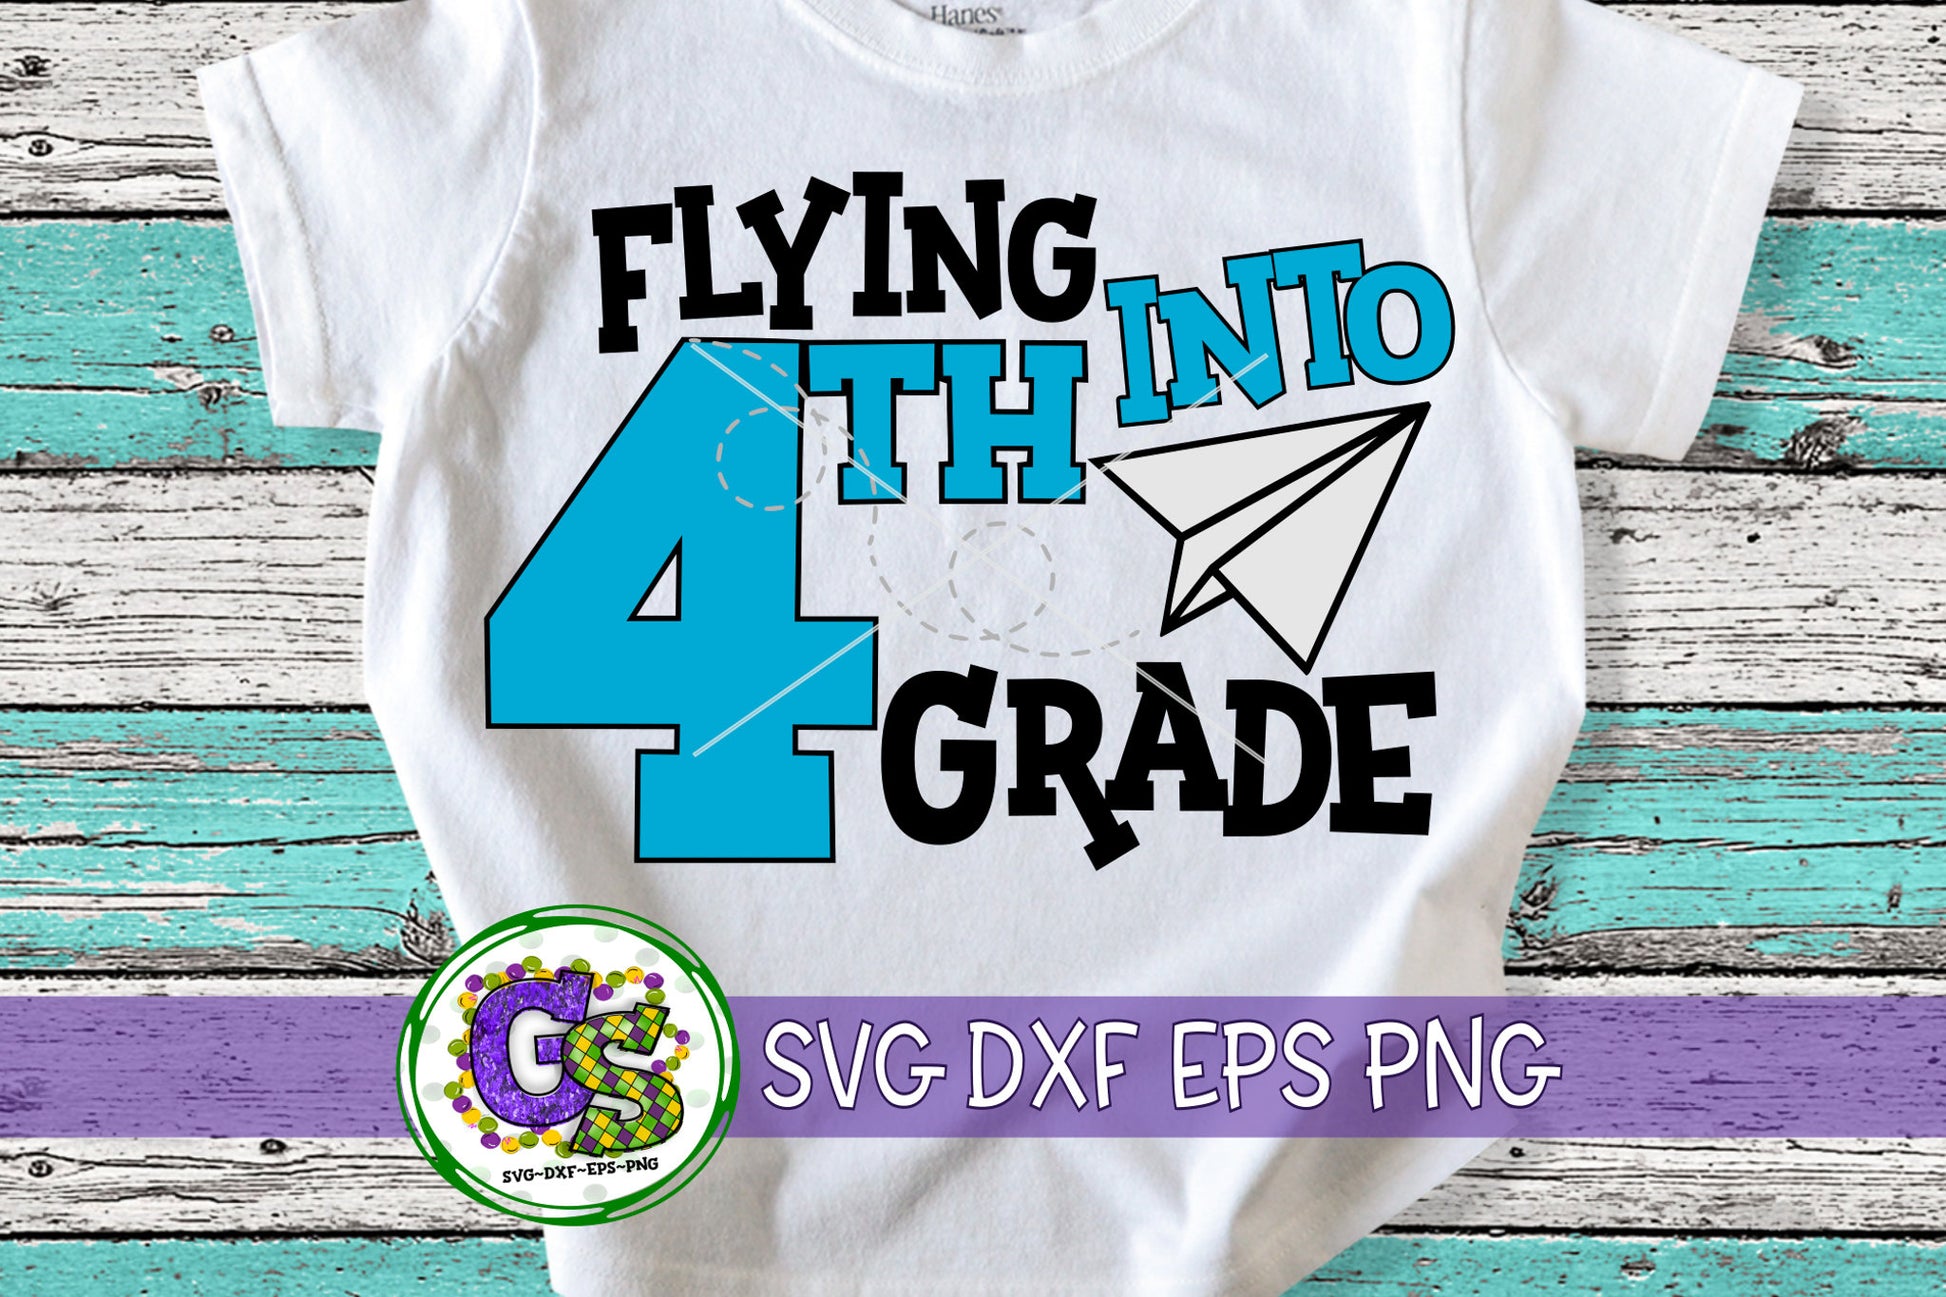 Flying Into 4th Grade svg dxf eps png 4th Grade SvG | Back To School | School SVG | 4th Grade SvG | Fourth grade | Instant Download Cut File